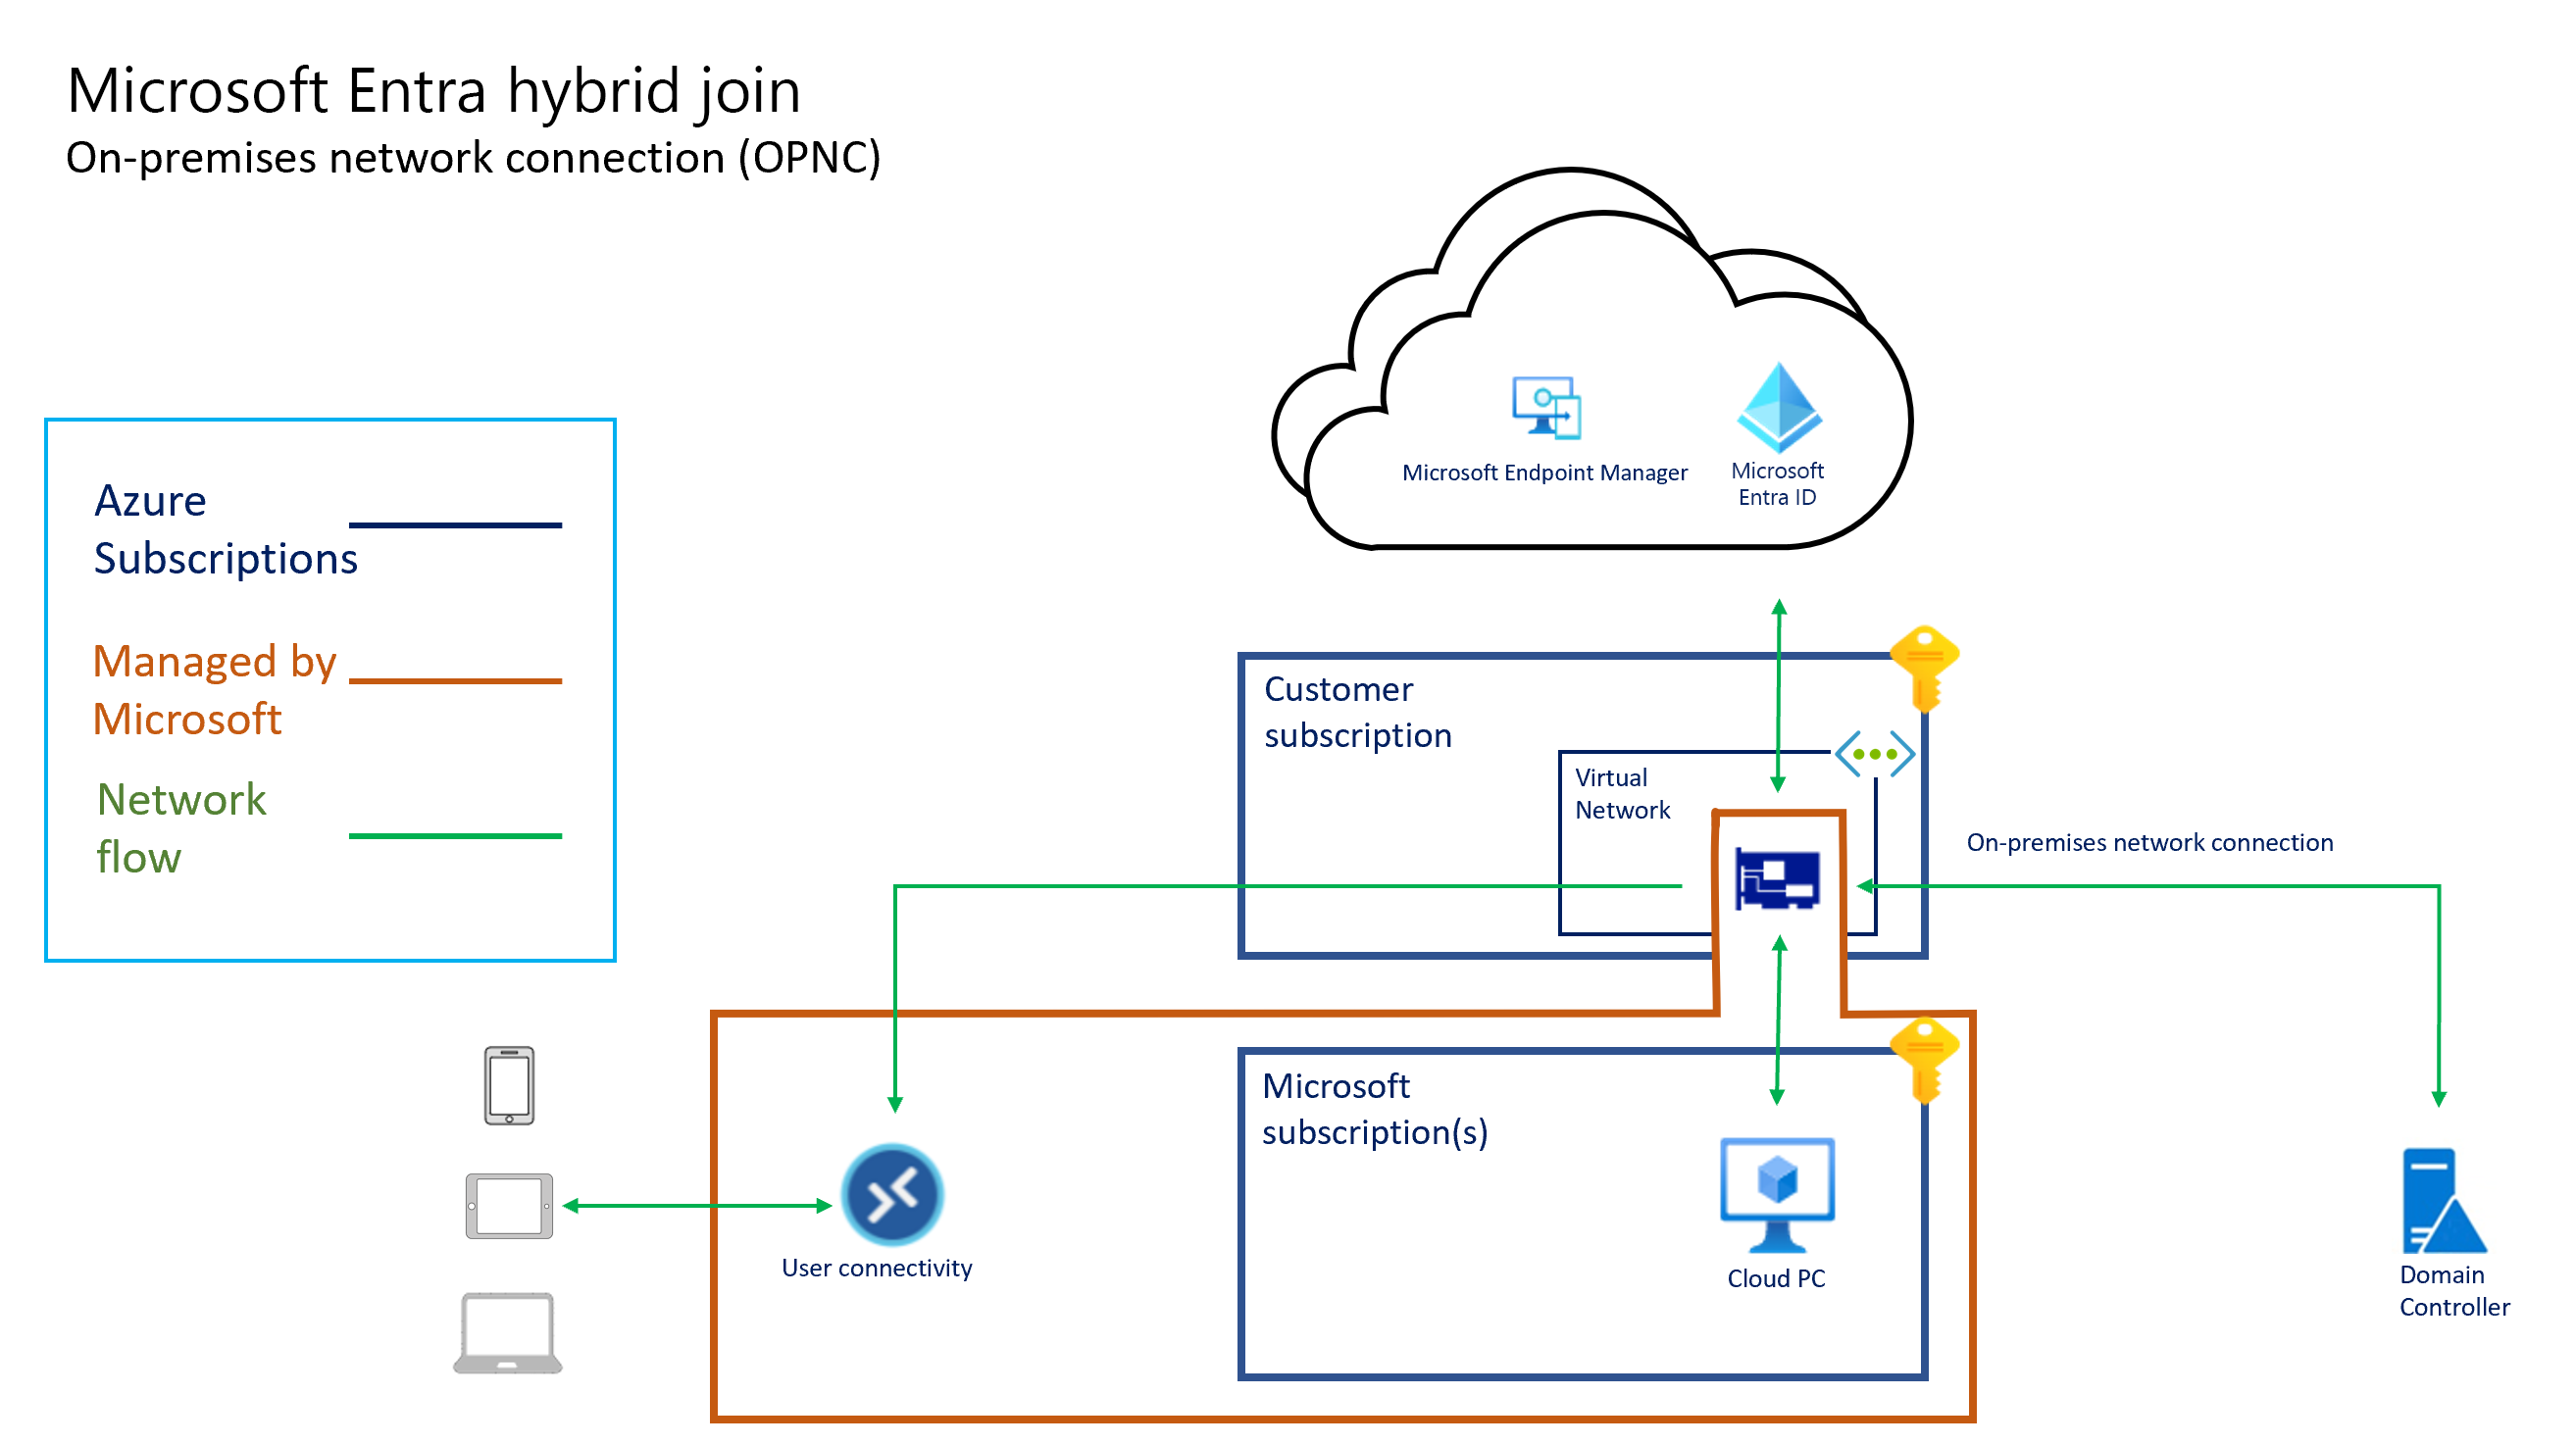 Screenshot of Microsoft Entra hybrid join architecture